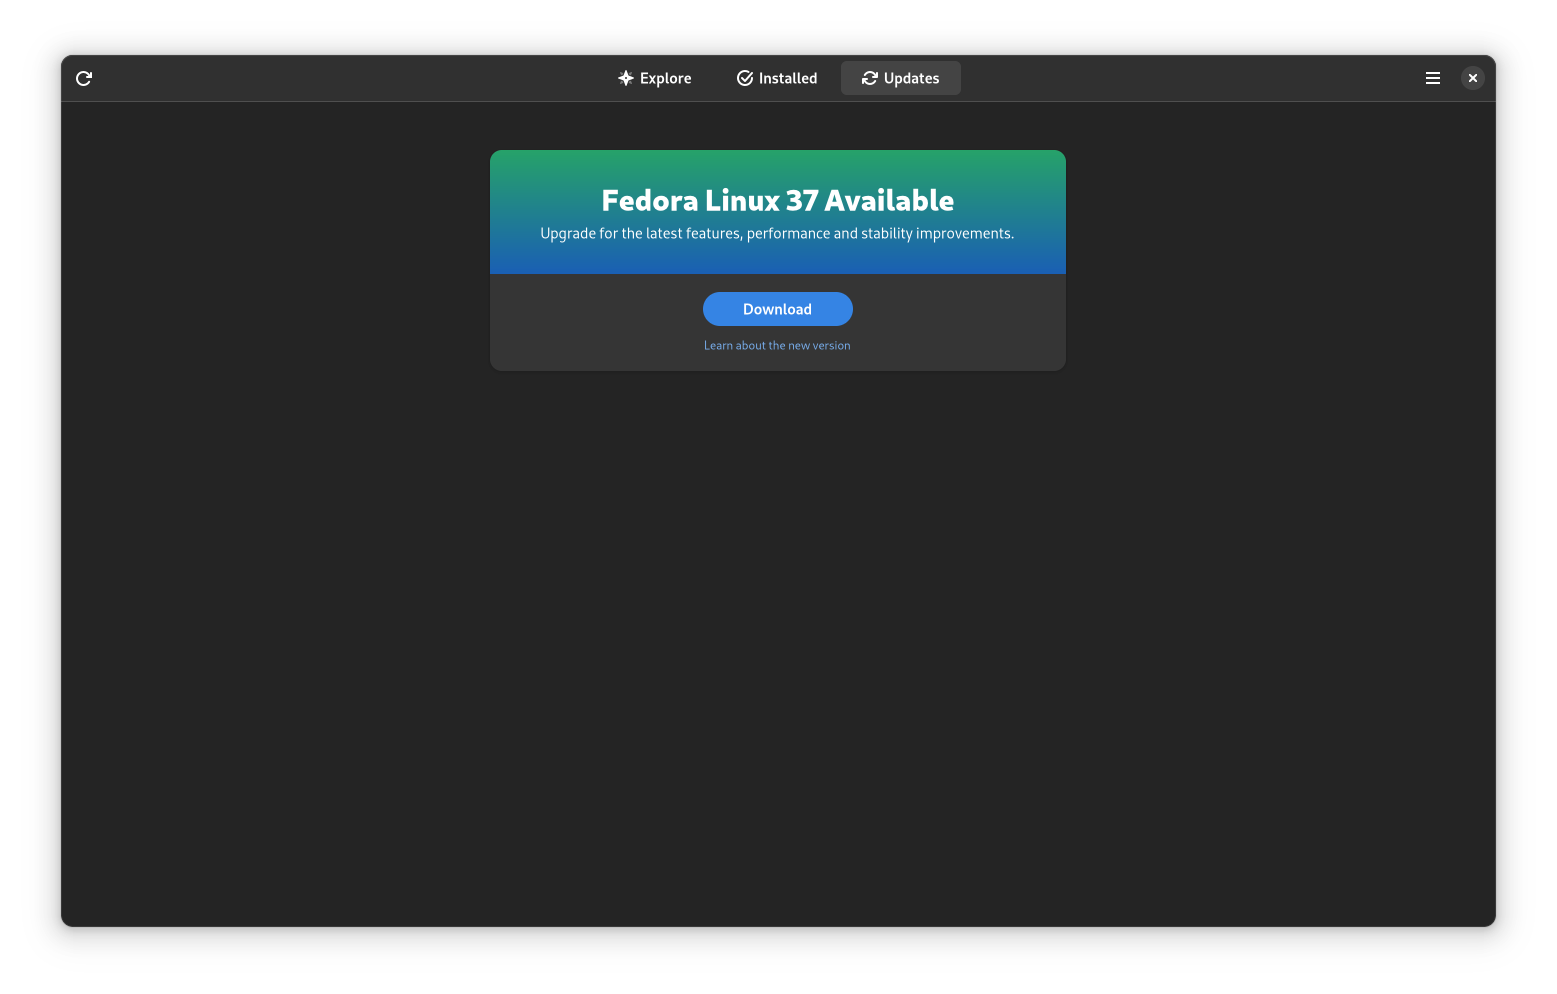 fedora 37 upgrade available notice in gnome software center